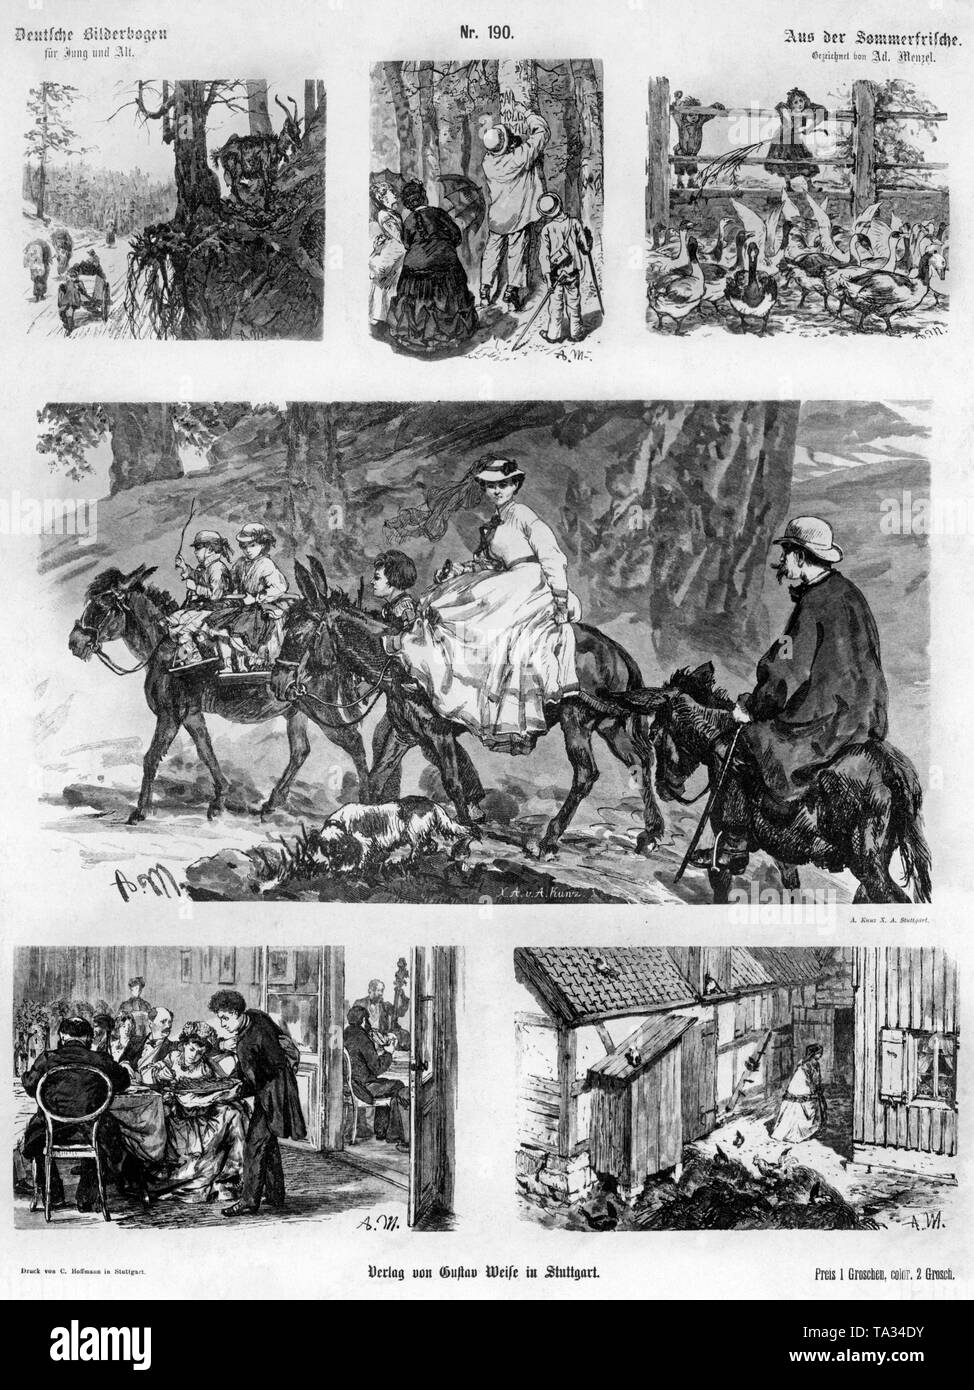 The drawing was made by the painter Adolph von Menzel and published in the magazine 'Sommerfrische'. It depicts various scenes of society. In the middle, the journey of a young woman. Undated photo from around 1900. Stock Photo